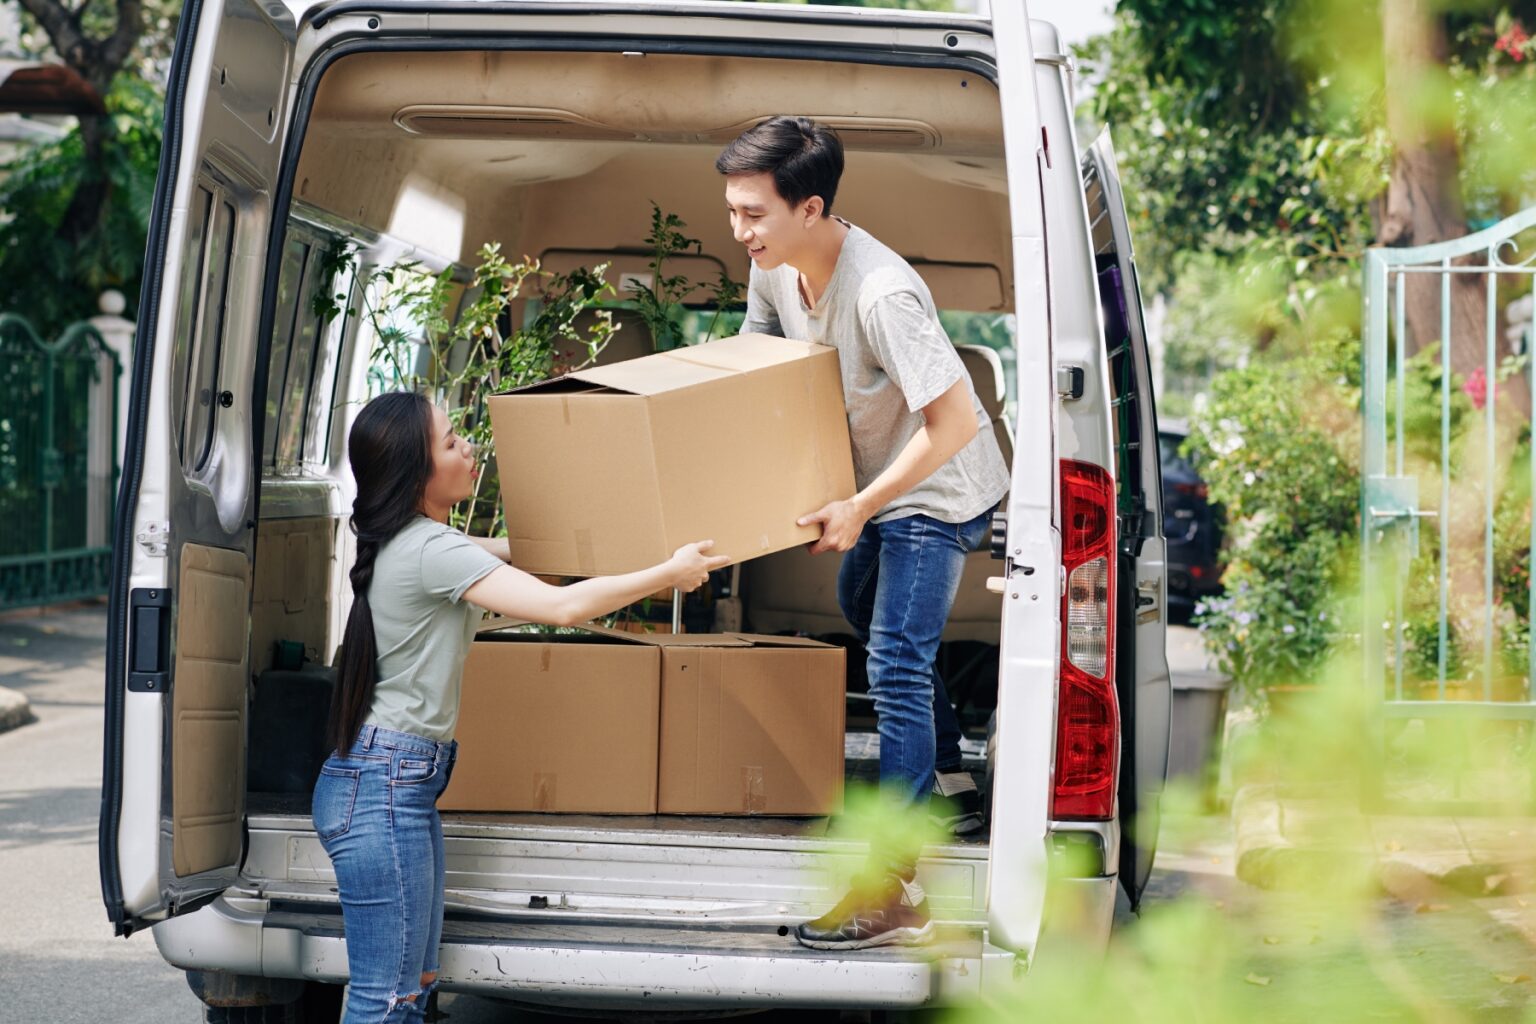 A man and a woman unload a box from a van filled with other boxes and plants